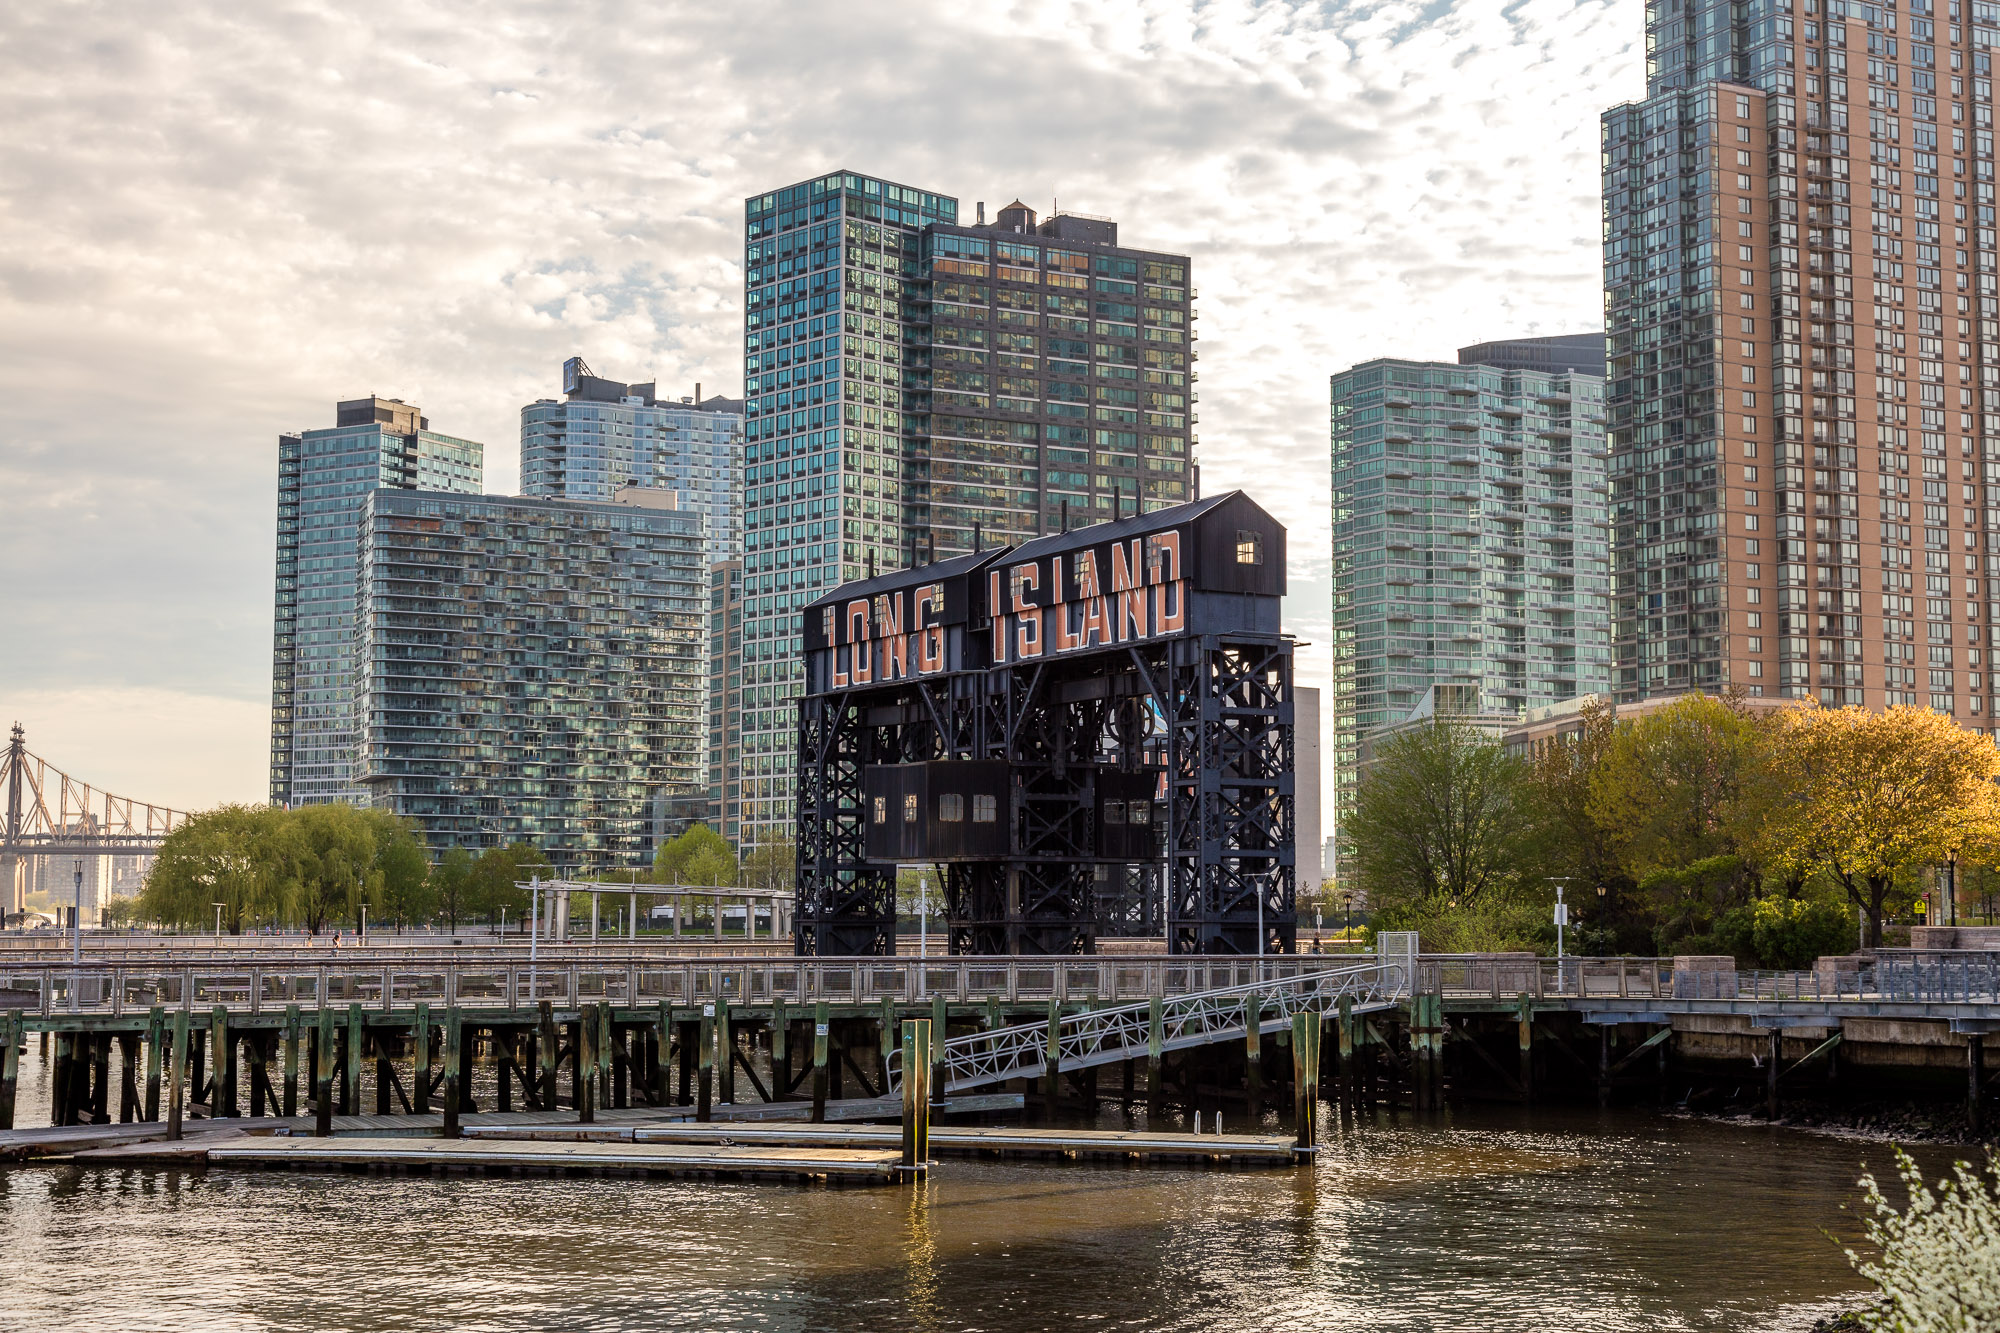 The waterfront in Long Island City. There is a pier with a sign that reads: Long Island. Behind the sign are many tall apartment buildings.